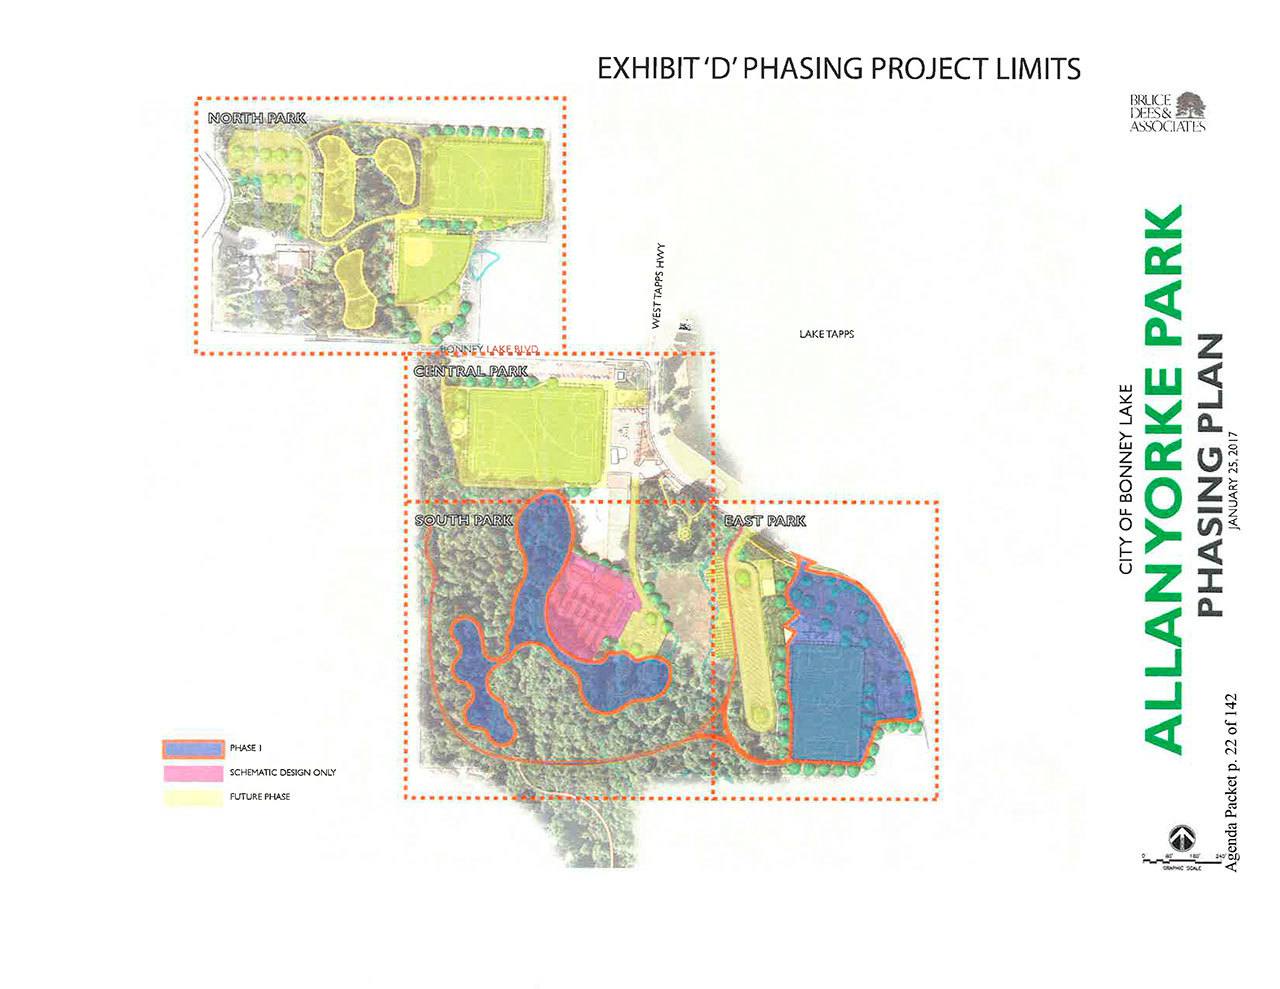 Blue areas, and the orange trails, are projects that will be constructed during Phase 1 of the park makeover. Yellow areas are projects to be completed in later phases. The pink area will be the future site of the BMX arena, which will be getting a concept sketch done during Phase 1. Image courtesy of the city of Bonney Lake.